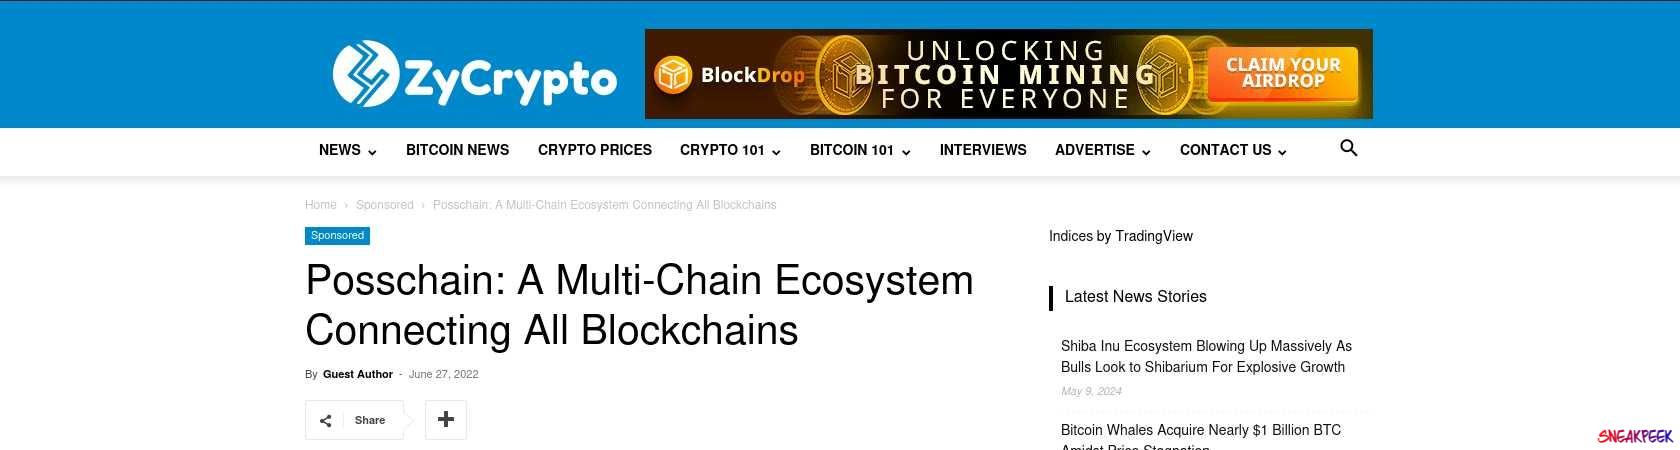 Read the full Article:  ⭲ Posschain: A Multi-Chain Ecosystem Connecting All Blockchains